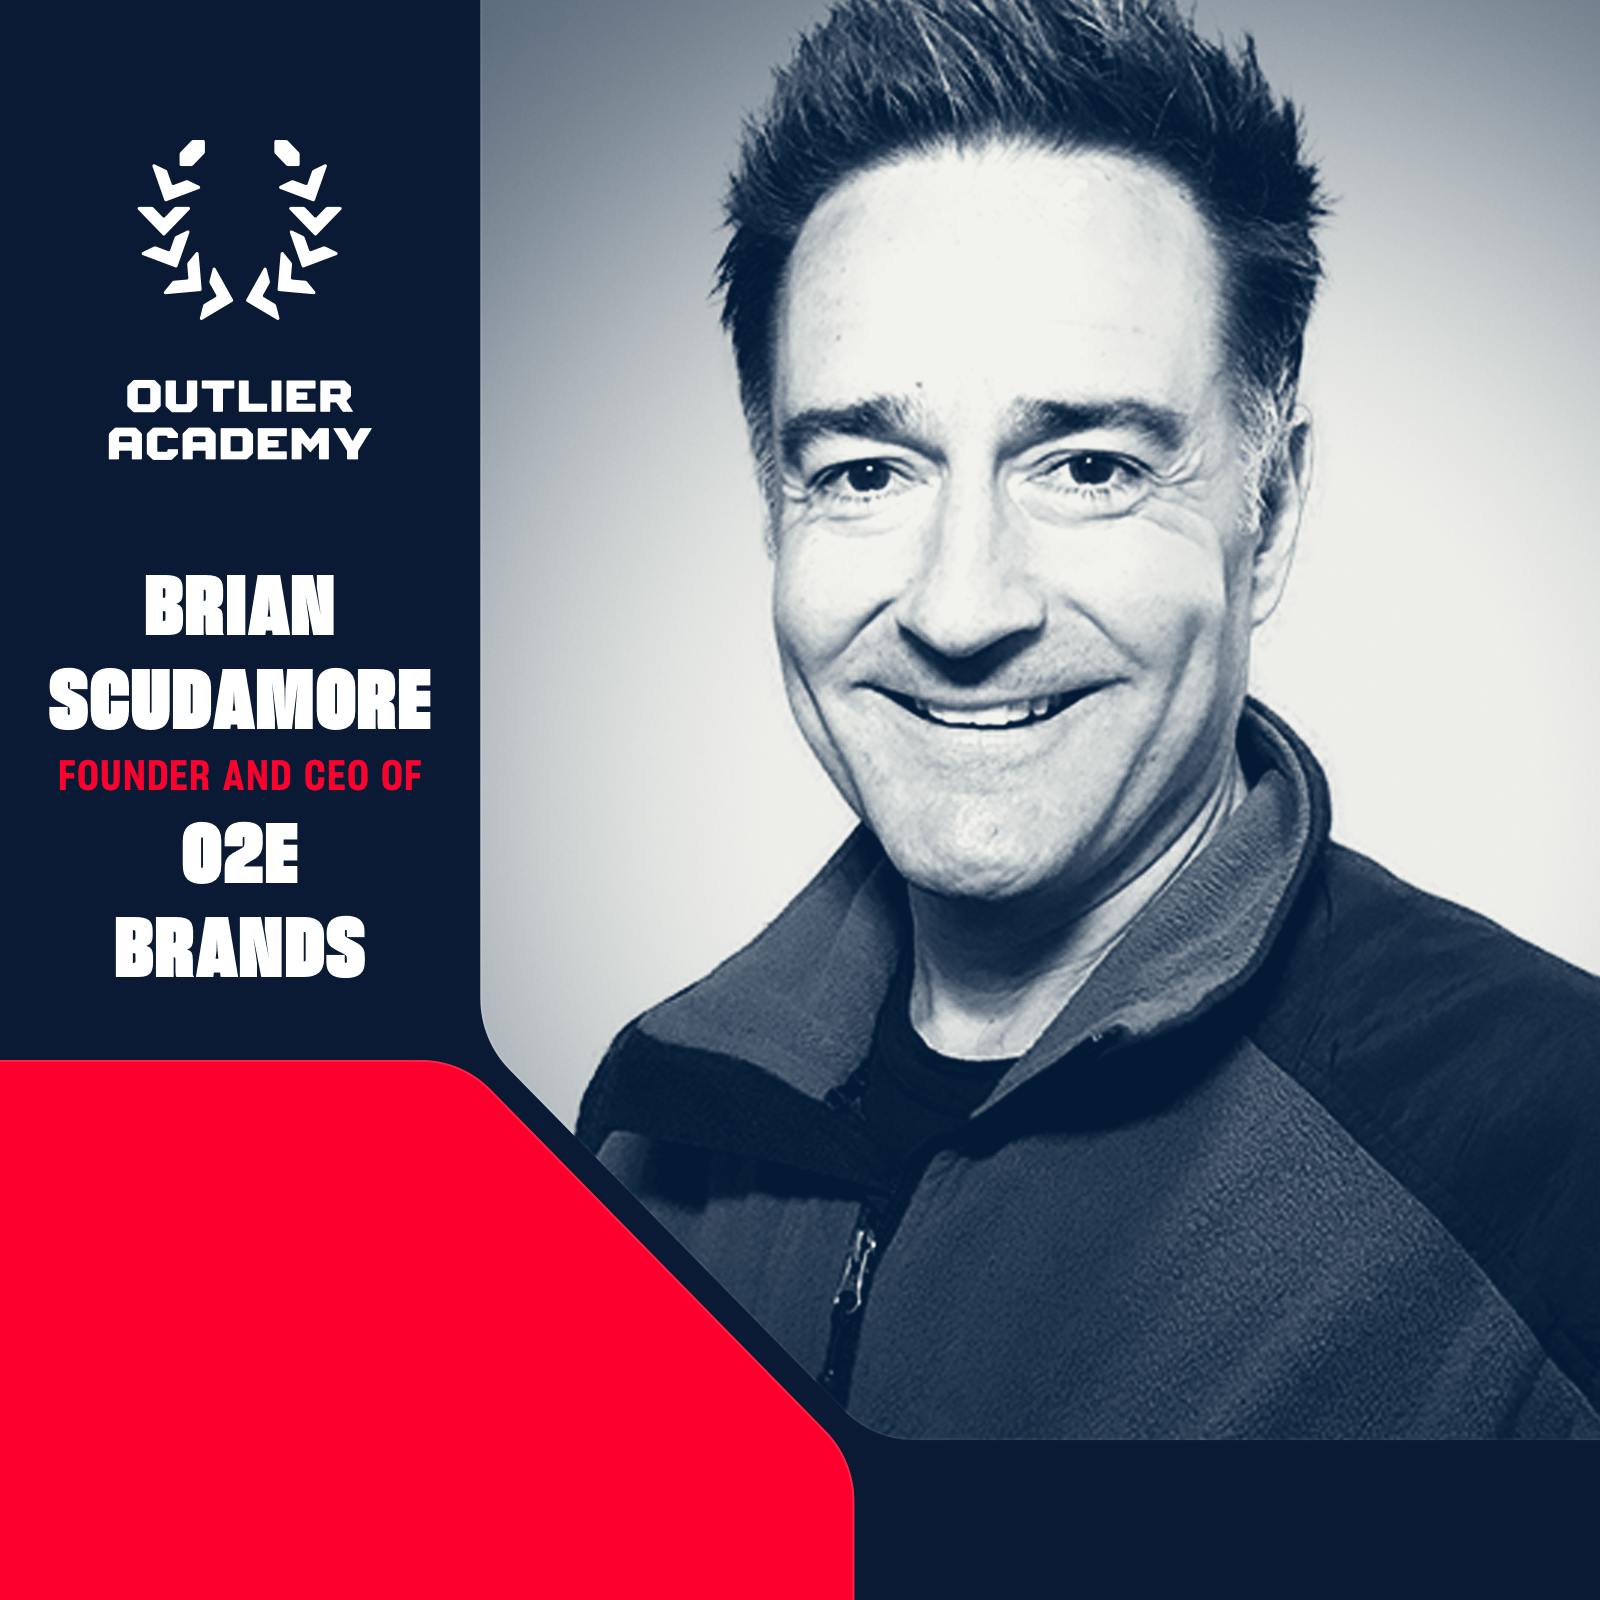 Best Books & Authors in 2022 – Brian Scudamore (My Favorite Books, Tools, Habits, and More) Image